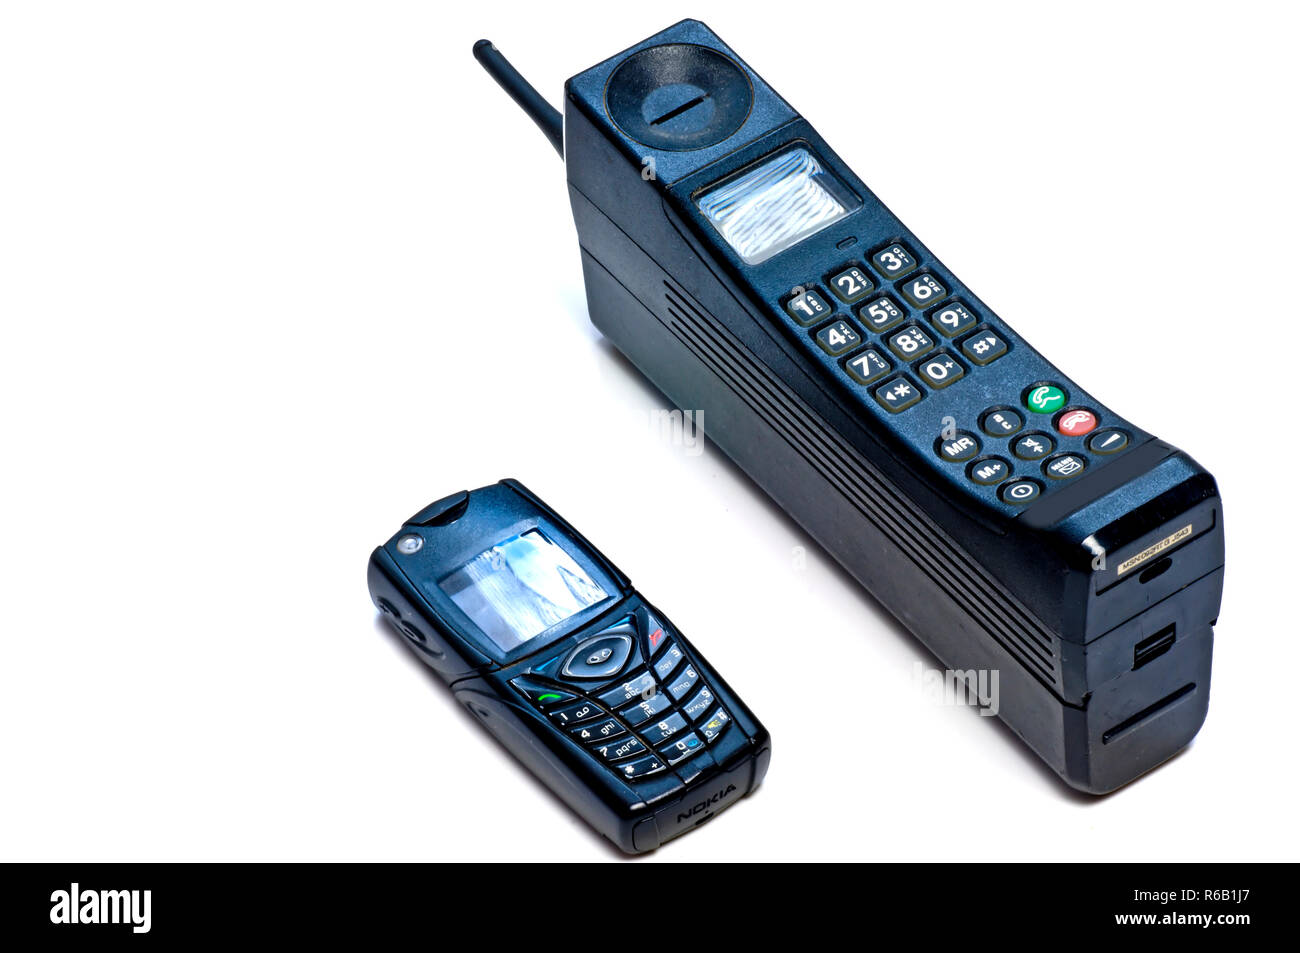 Mobilphone, Old, New,Big,Small,Modern,Antique,Development,Size,Technology,Telephone,Cell,Communication,Indstustry,Two,Compare,Heavy,Light Stock Photo